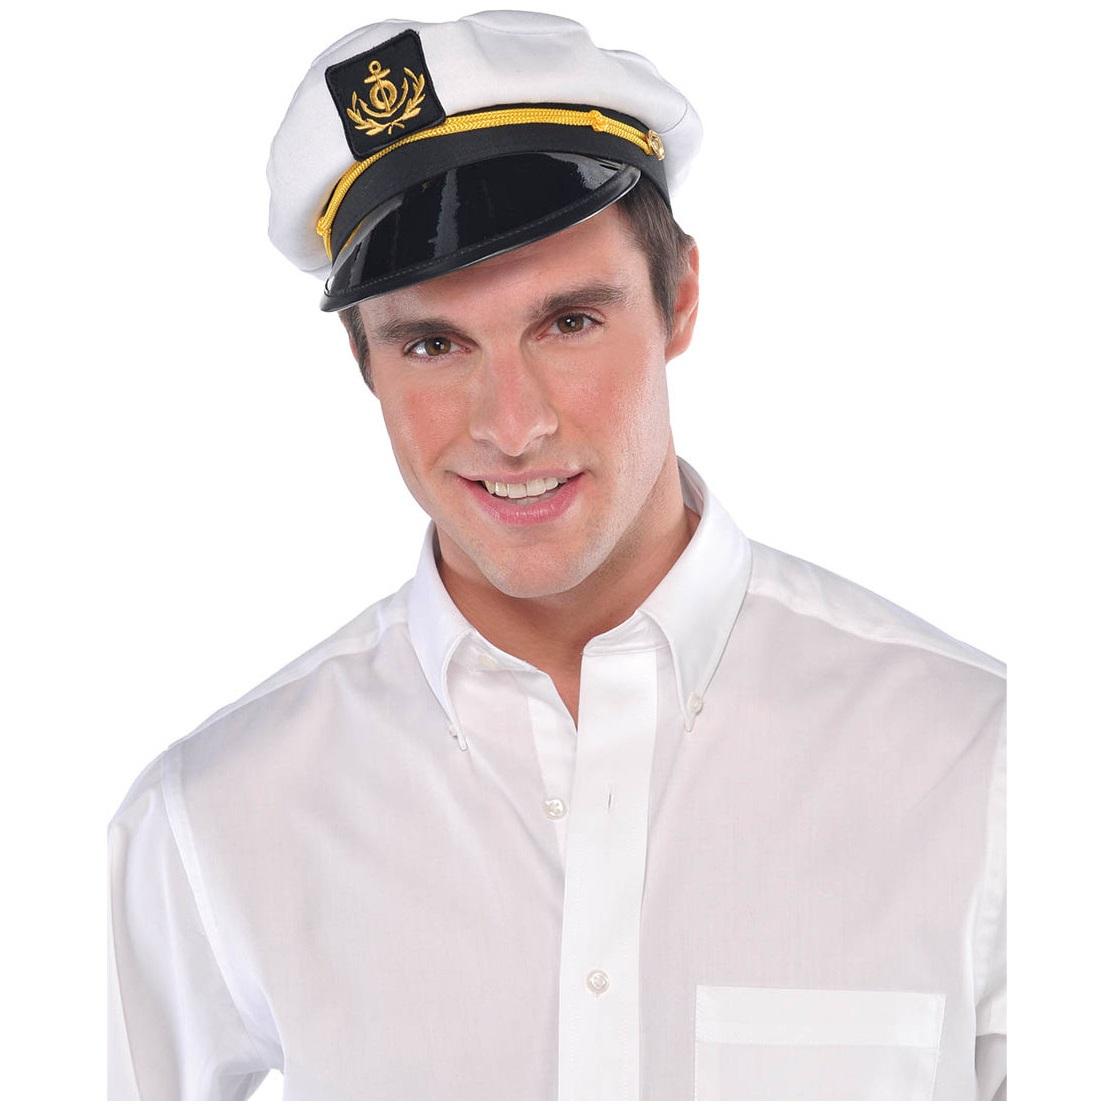 Skipper Hat Costumes & Apparel - Party Centre